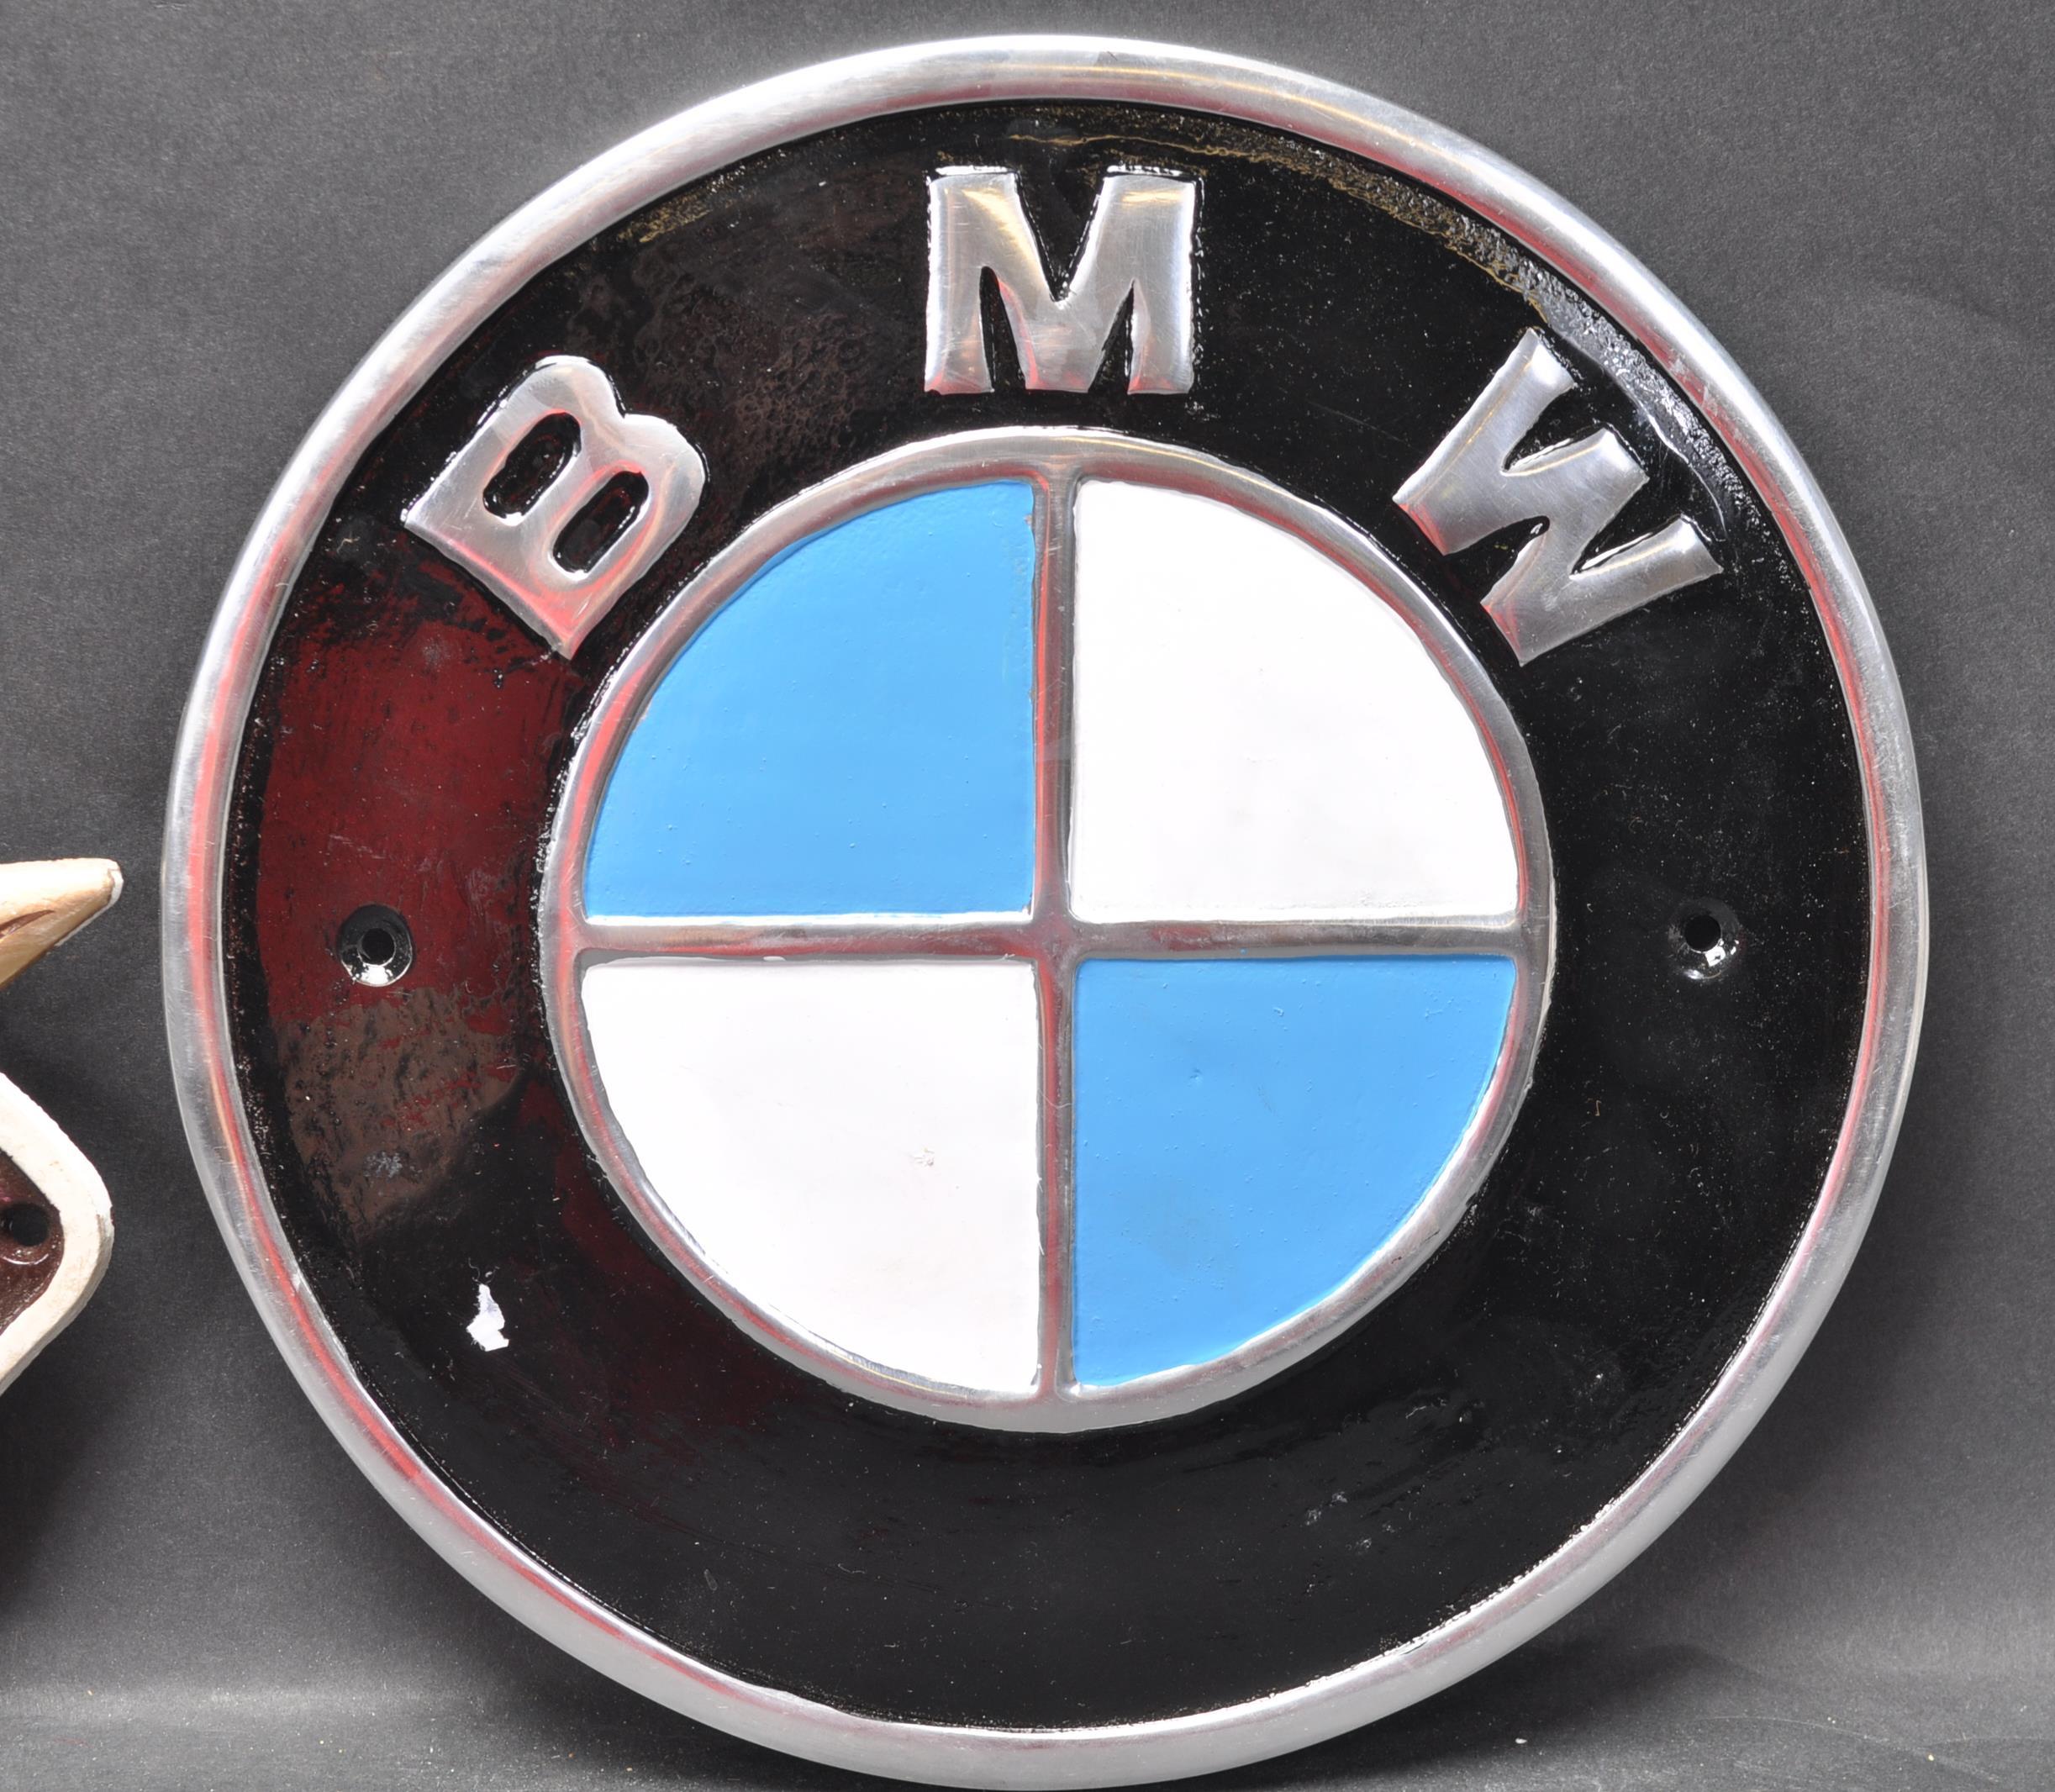 VINTAGE STYLE CAST ALUMINIUM SHOP DISPLAY BMW PLAQUE WITH ANOTHER - Image 2 of 4